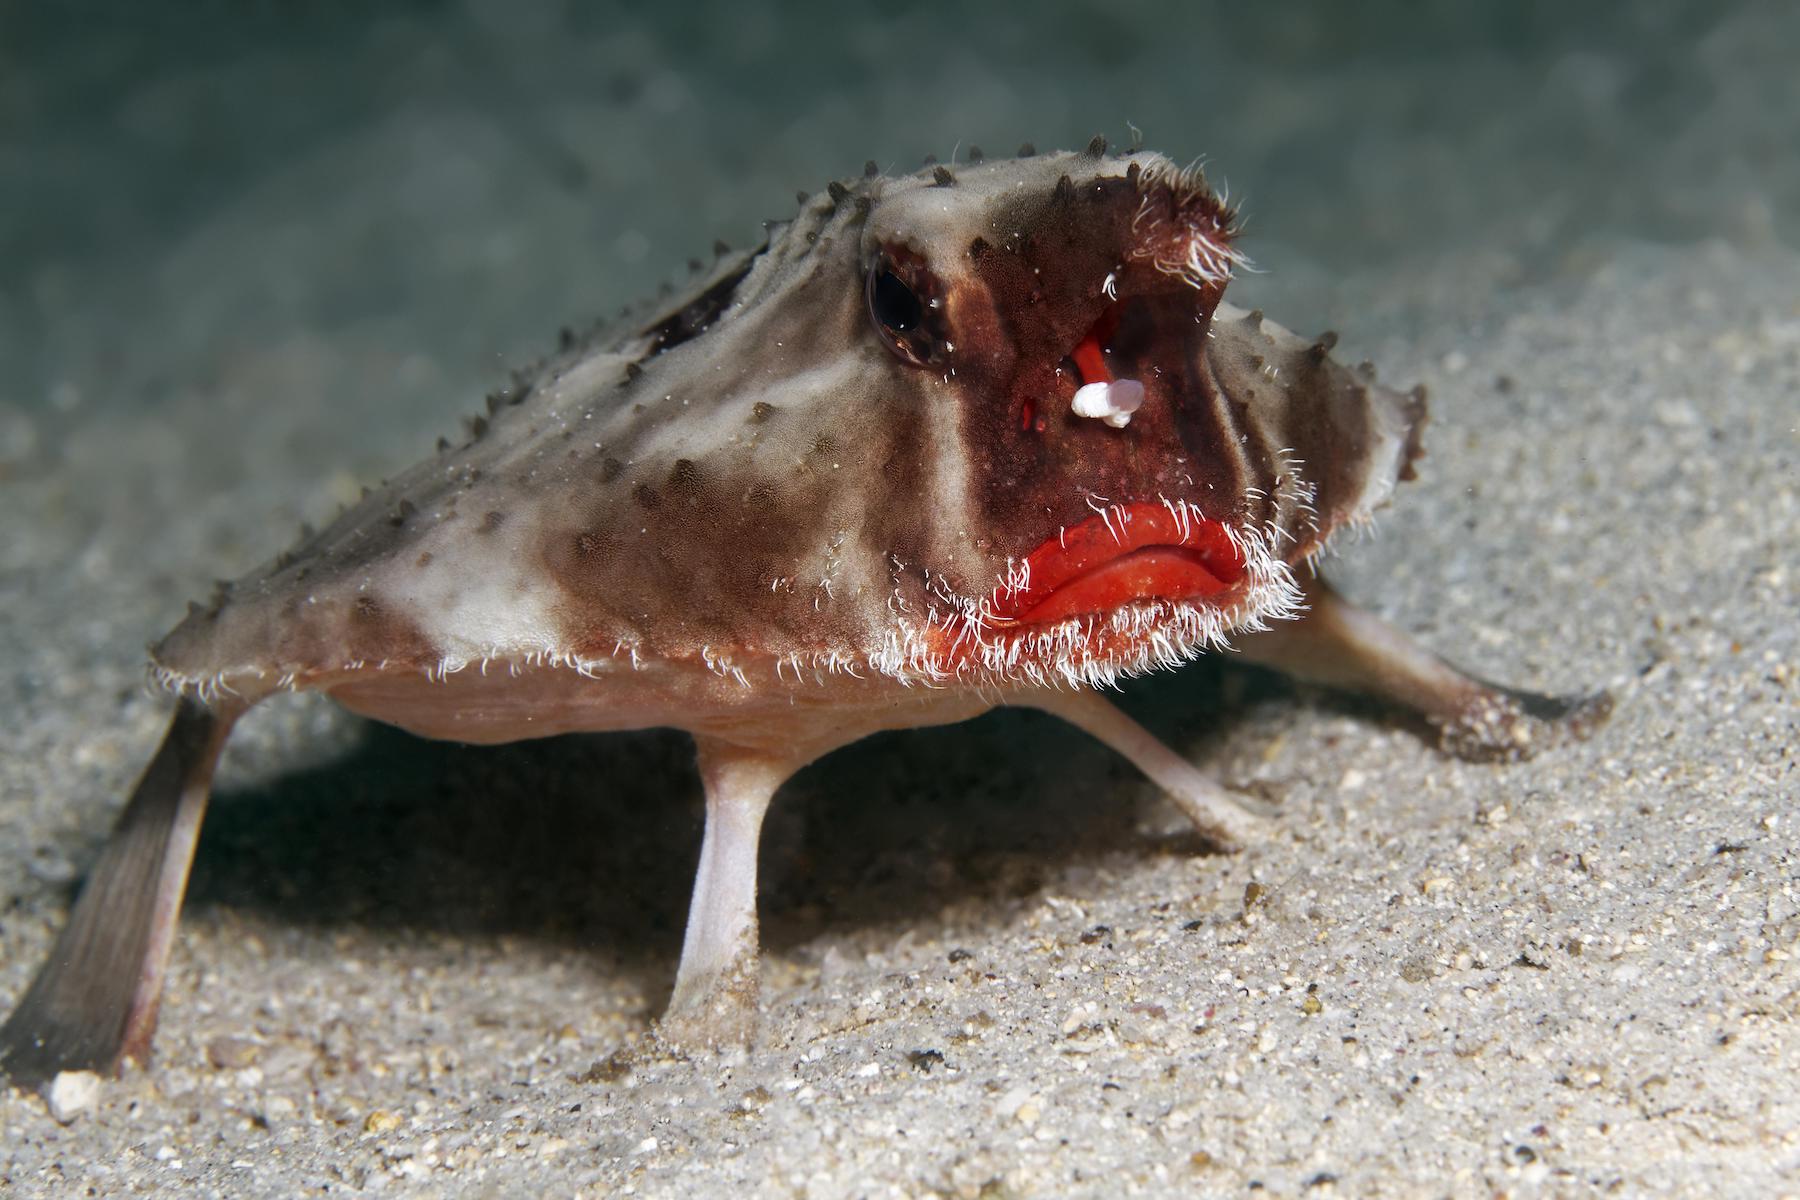 Photograph of the red-lipped batfish as it waddles along the seafloor